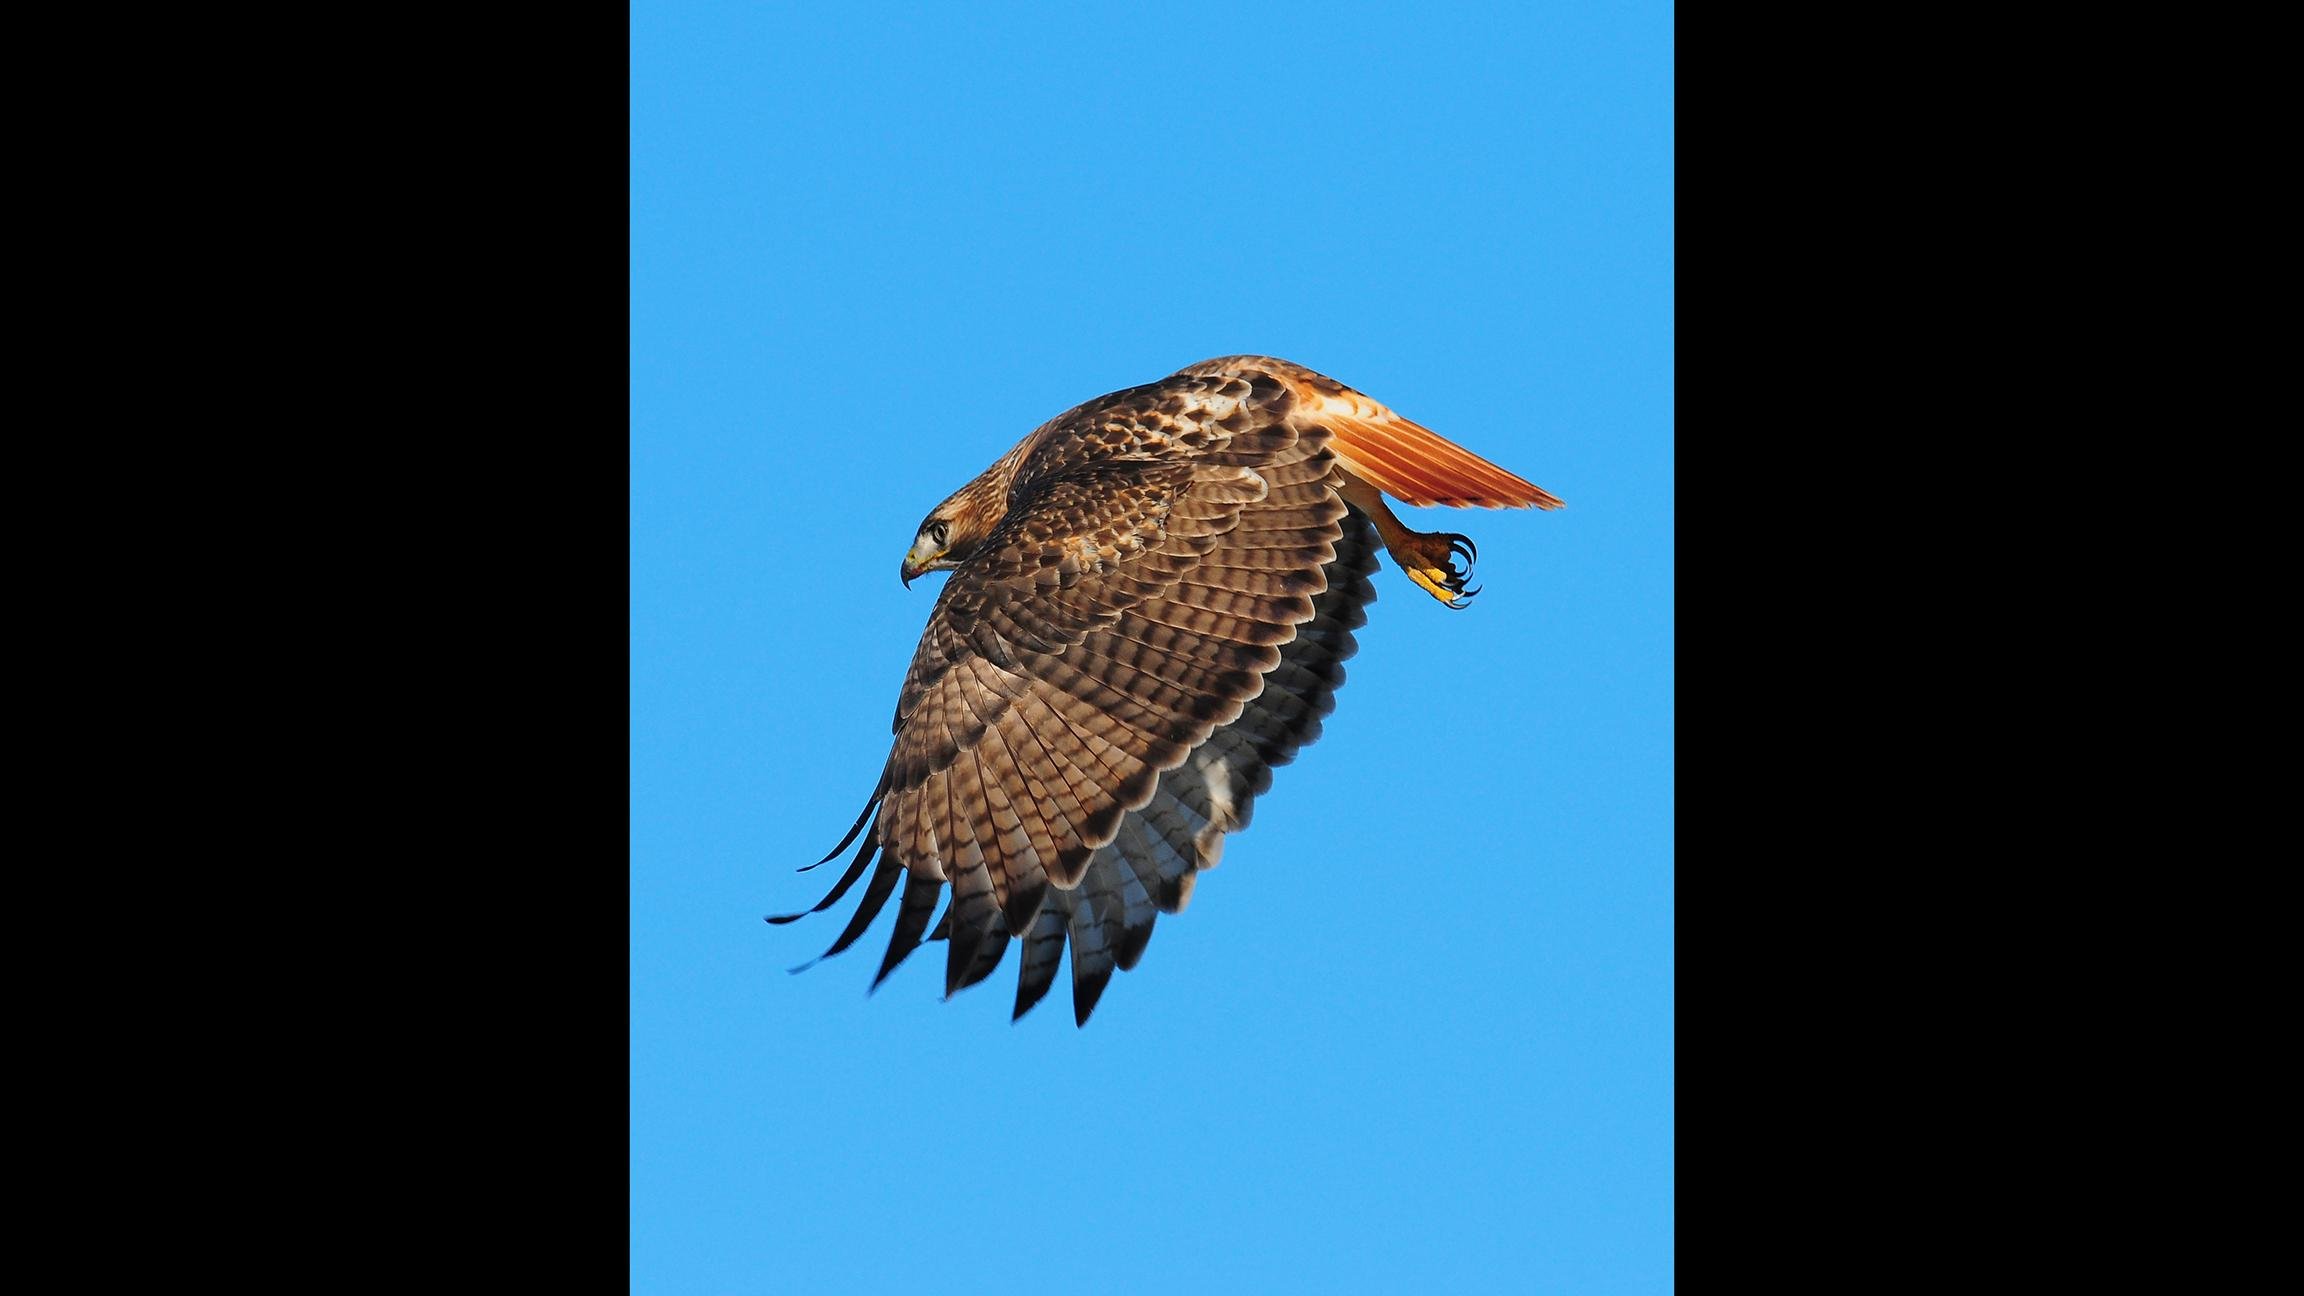 Eyes to the skies: Birdwatchers of all feathers will be on the lookout for red-tailed hawks and other raptors this weekend. (Copyright Robert Visconti)